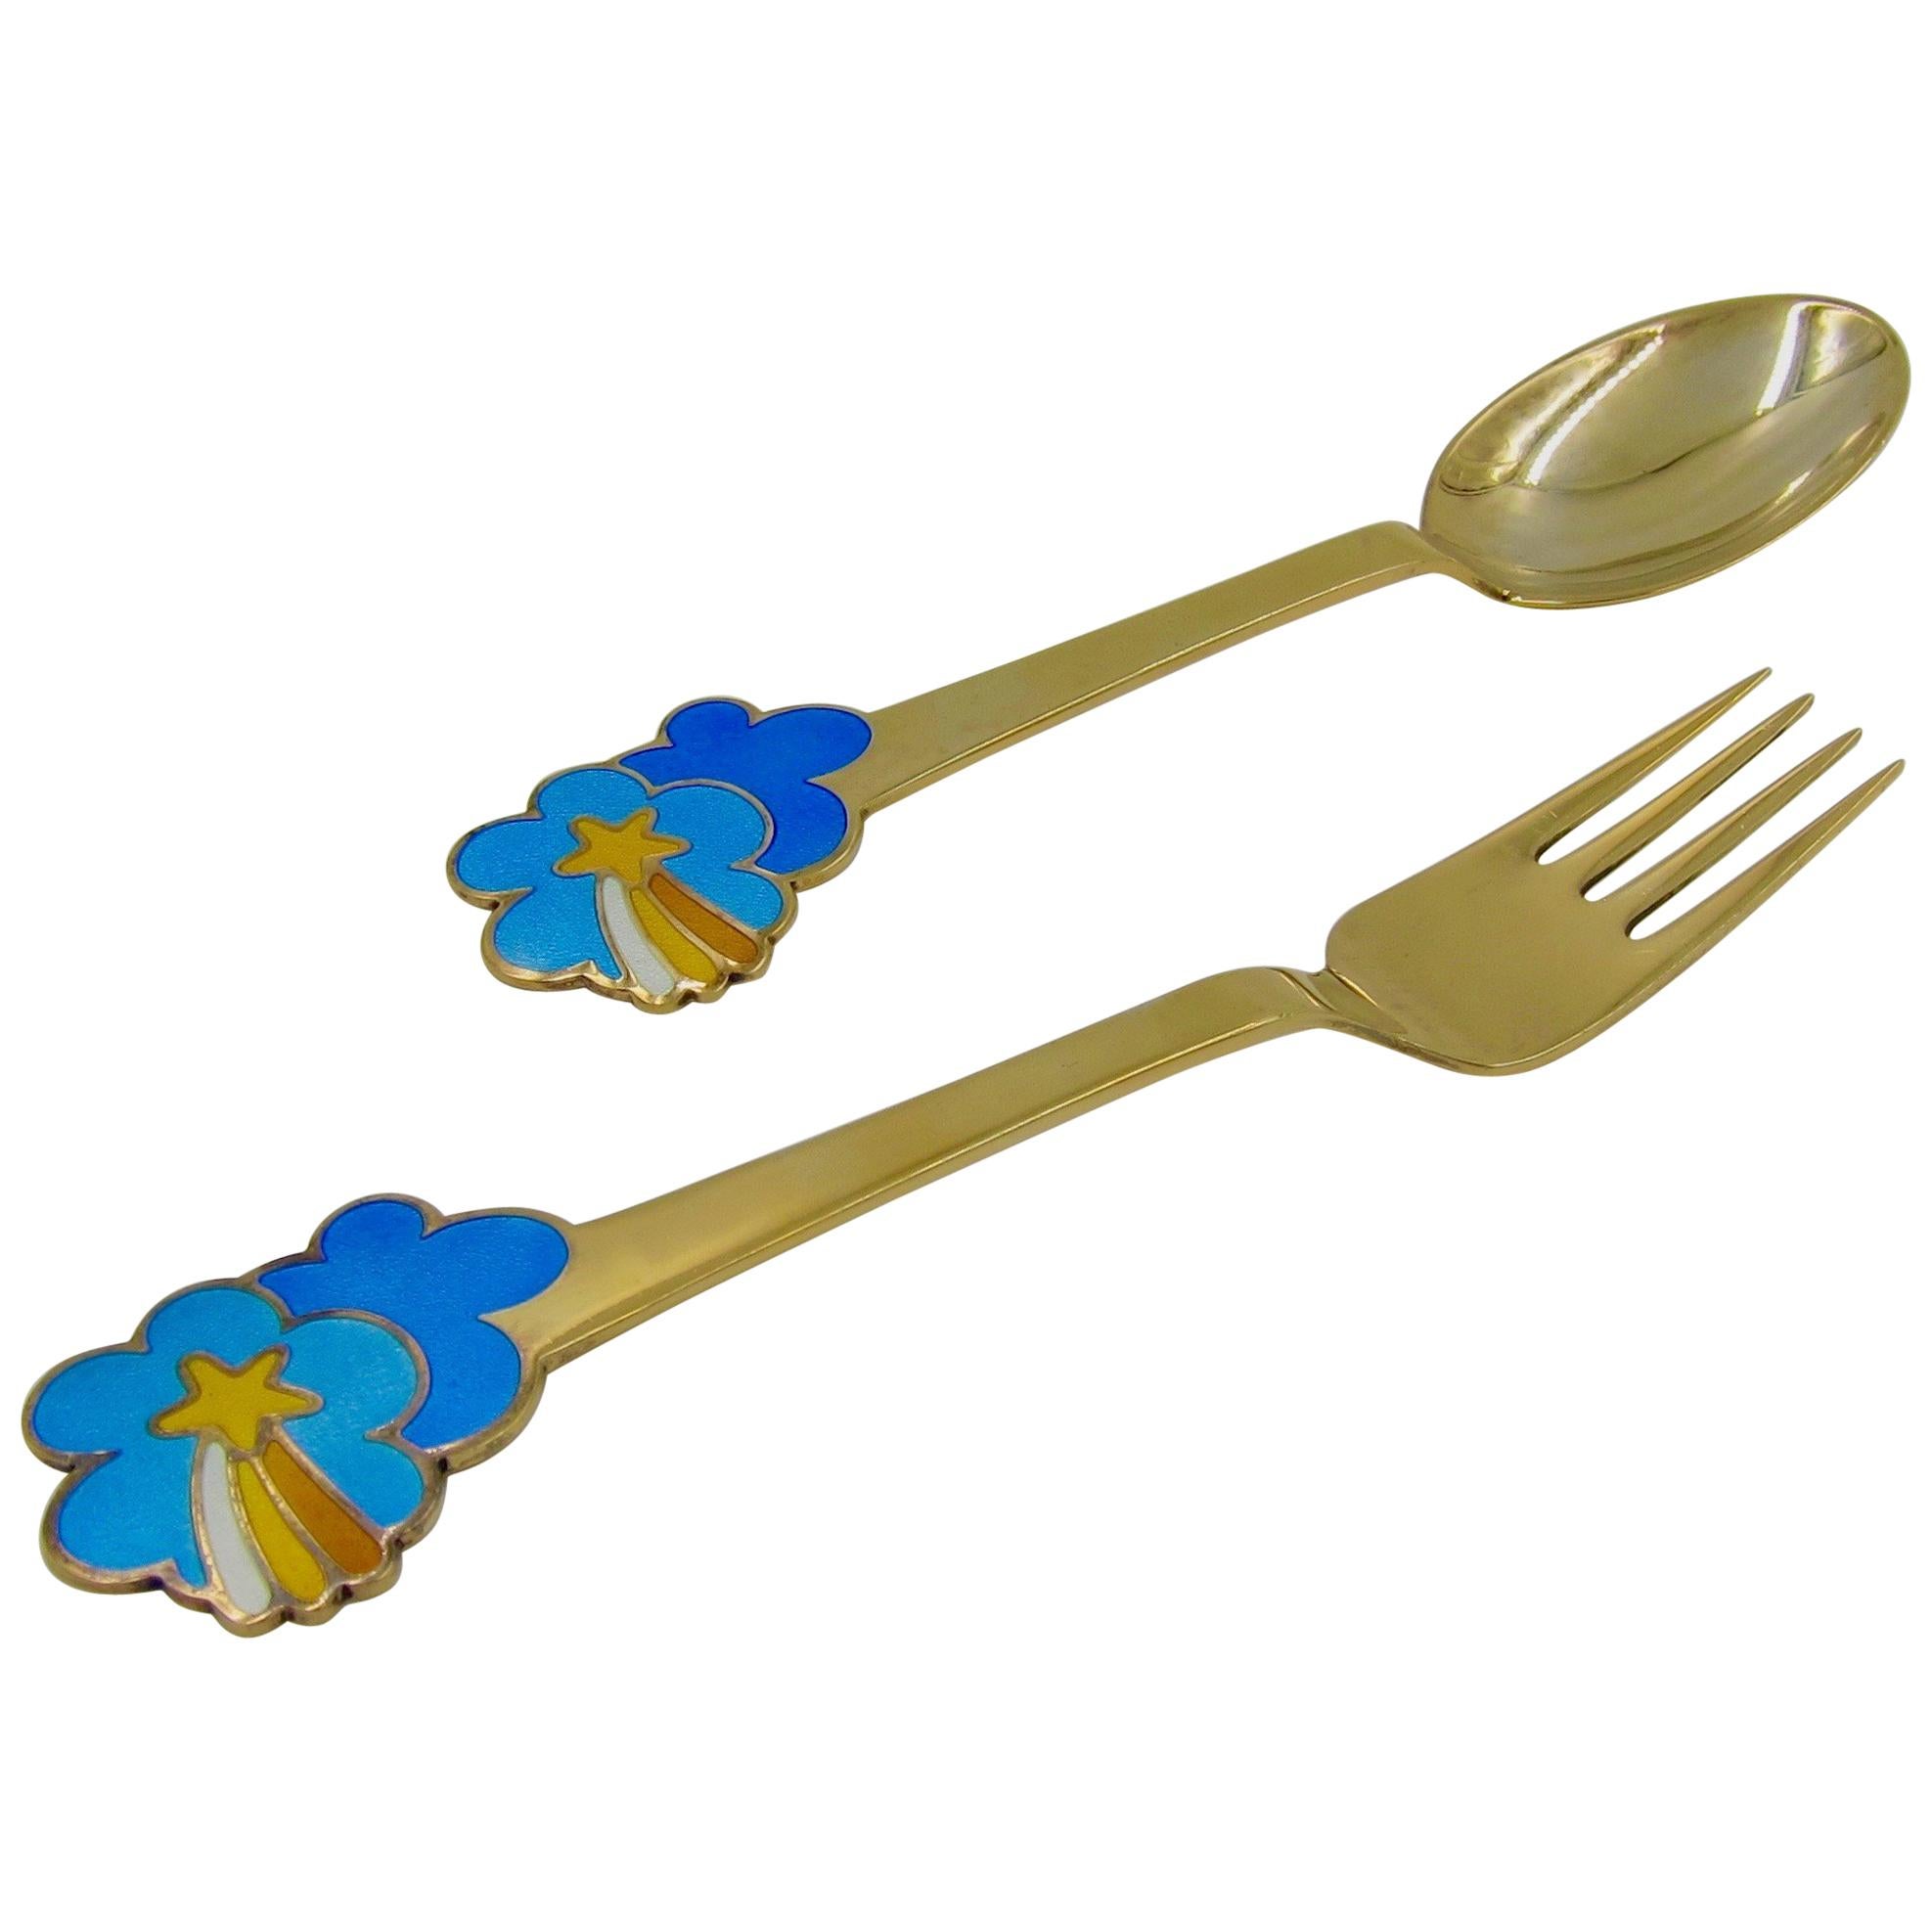 1975 Anton Michelsen Gilded Silver and Enamel Christmas Fork and Spoon Set